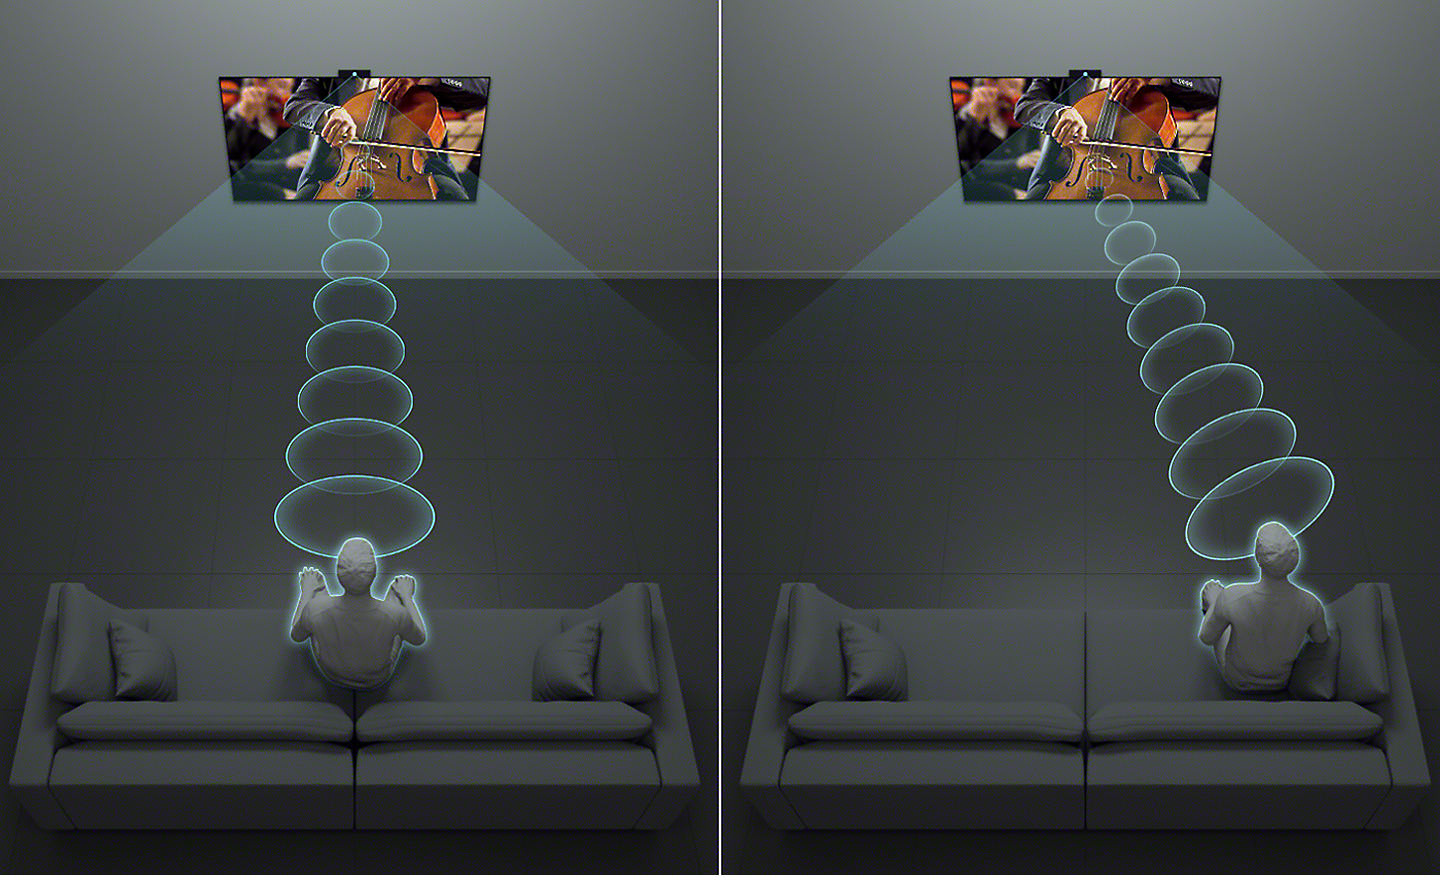 Split screen graphic showing a person listening to TV from the front and a person listening to TV from the side